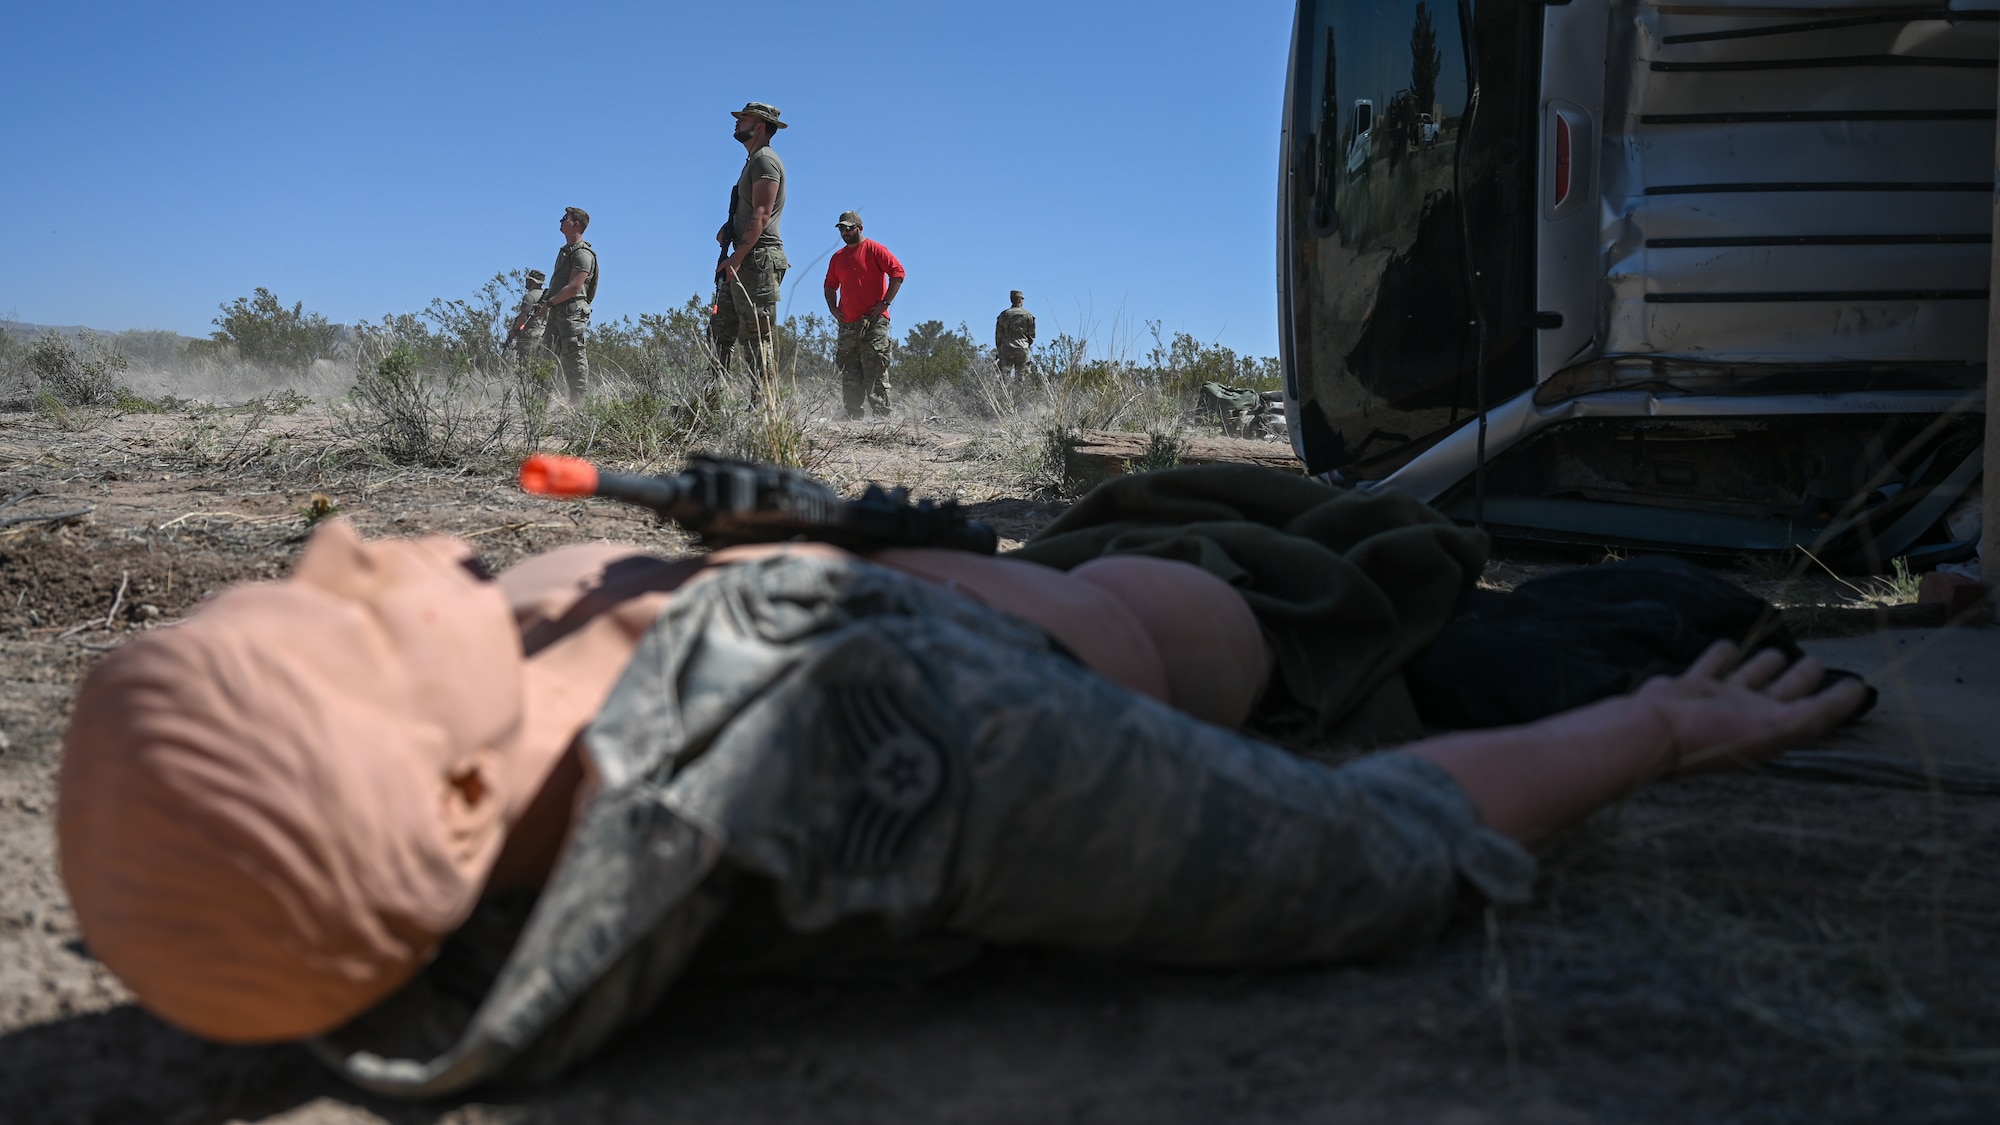 A mannequin lays on the ground while people in military uniforms stand in the distance.